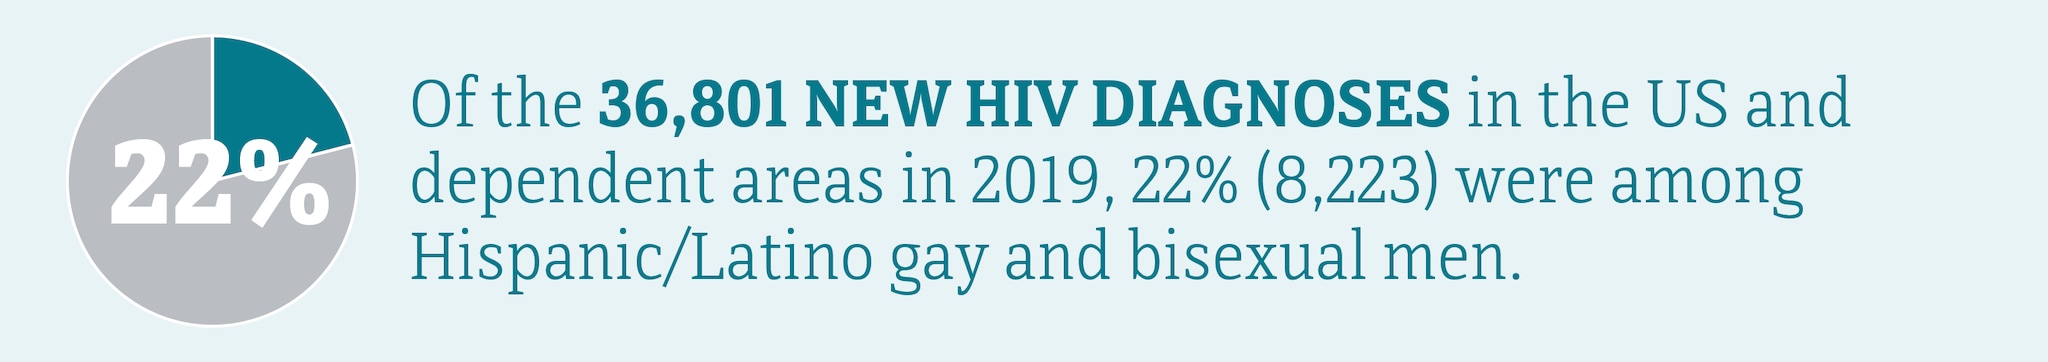 This banner shows 22 percent of the 36,801 new HIV diagnoses in the US and dependent areas in 2019 were among Hispanic/Latino gay and bisexual men.